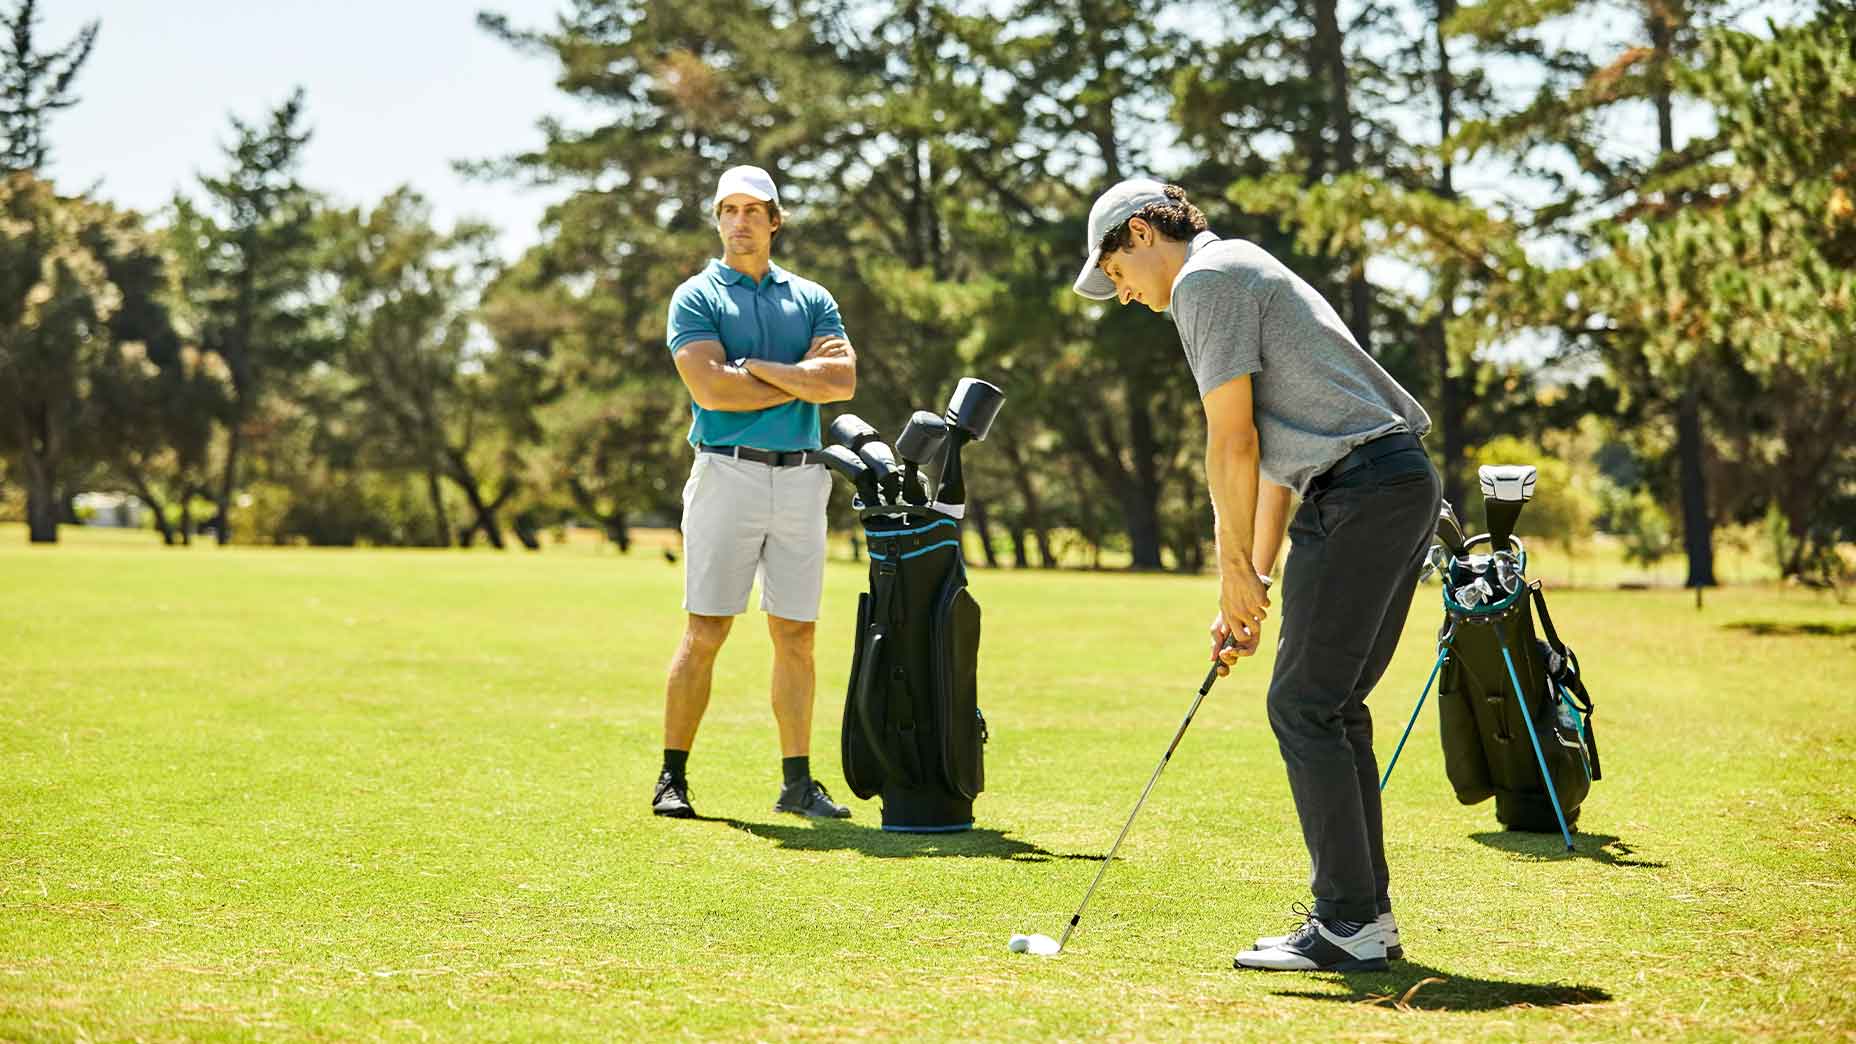 stock image of golfer practices chip shot next to other golfer standing with arms crossed